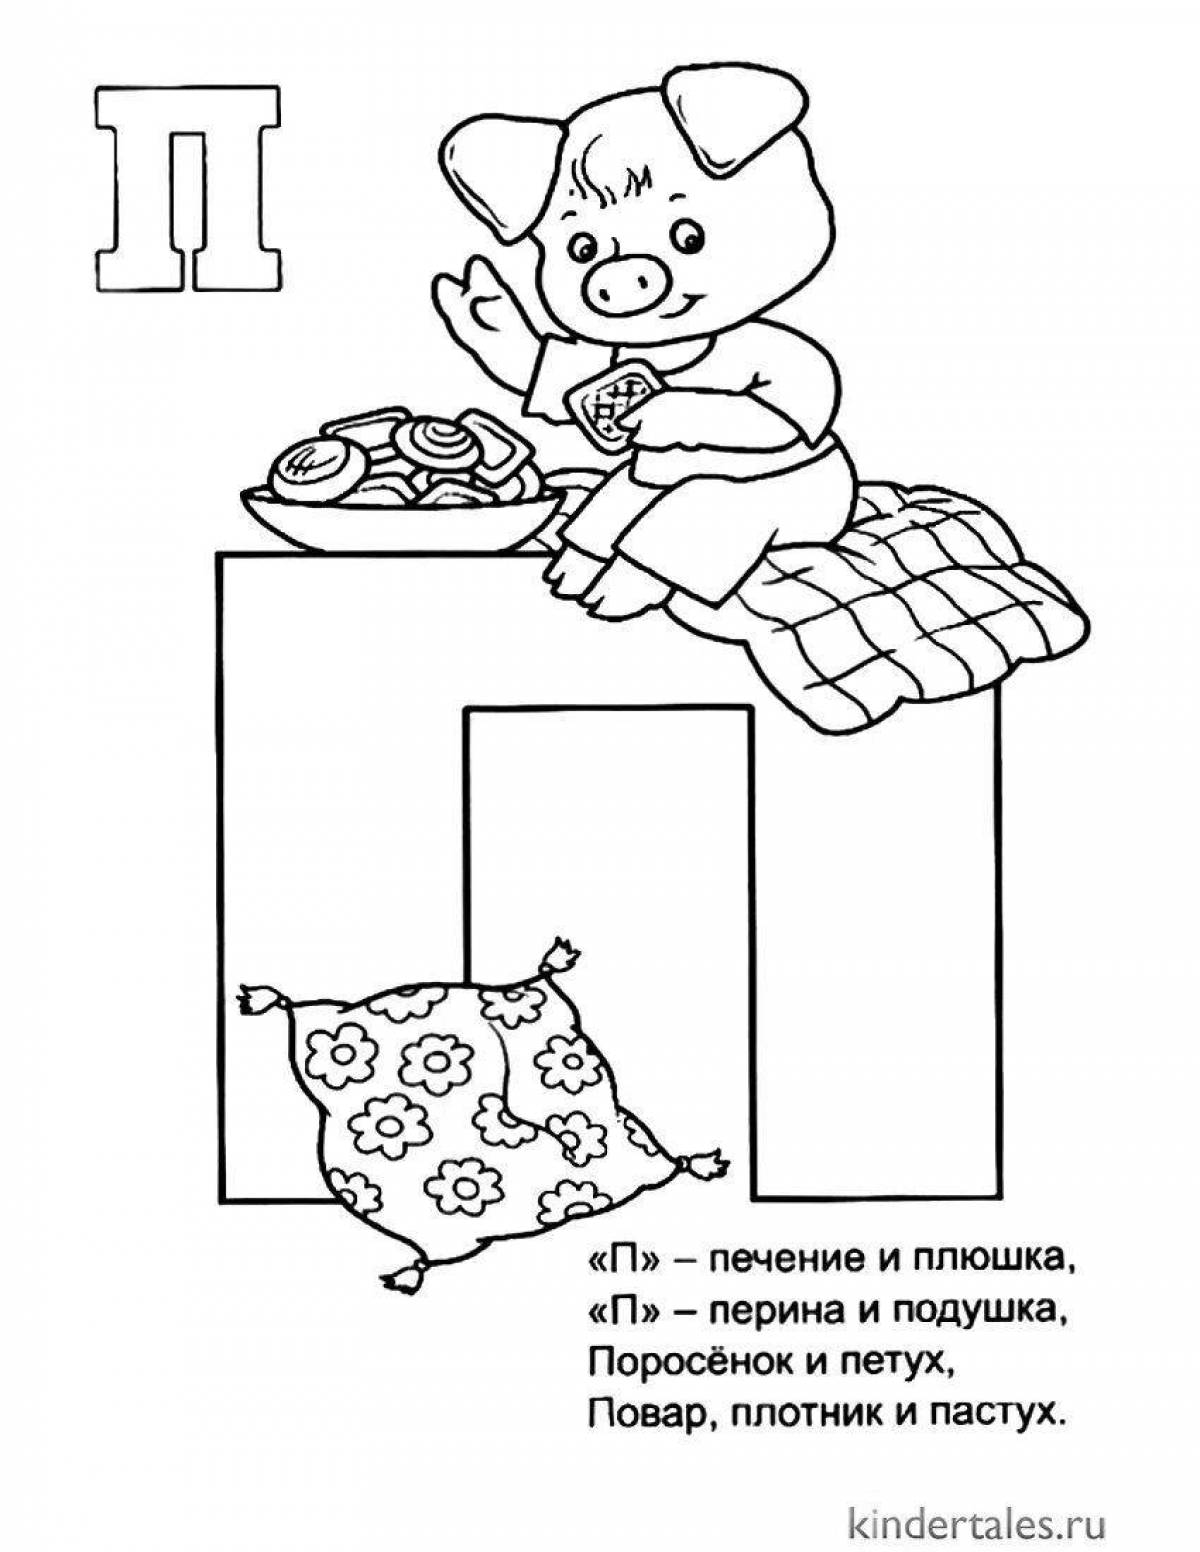 Coloring pages letter p for kids